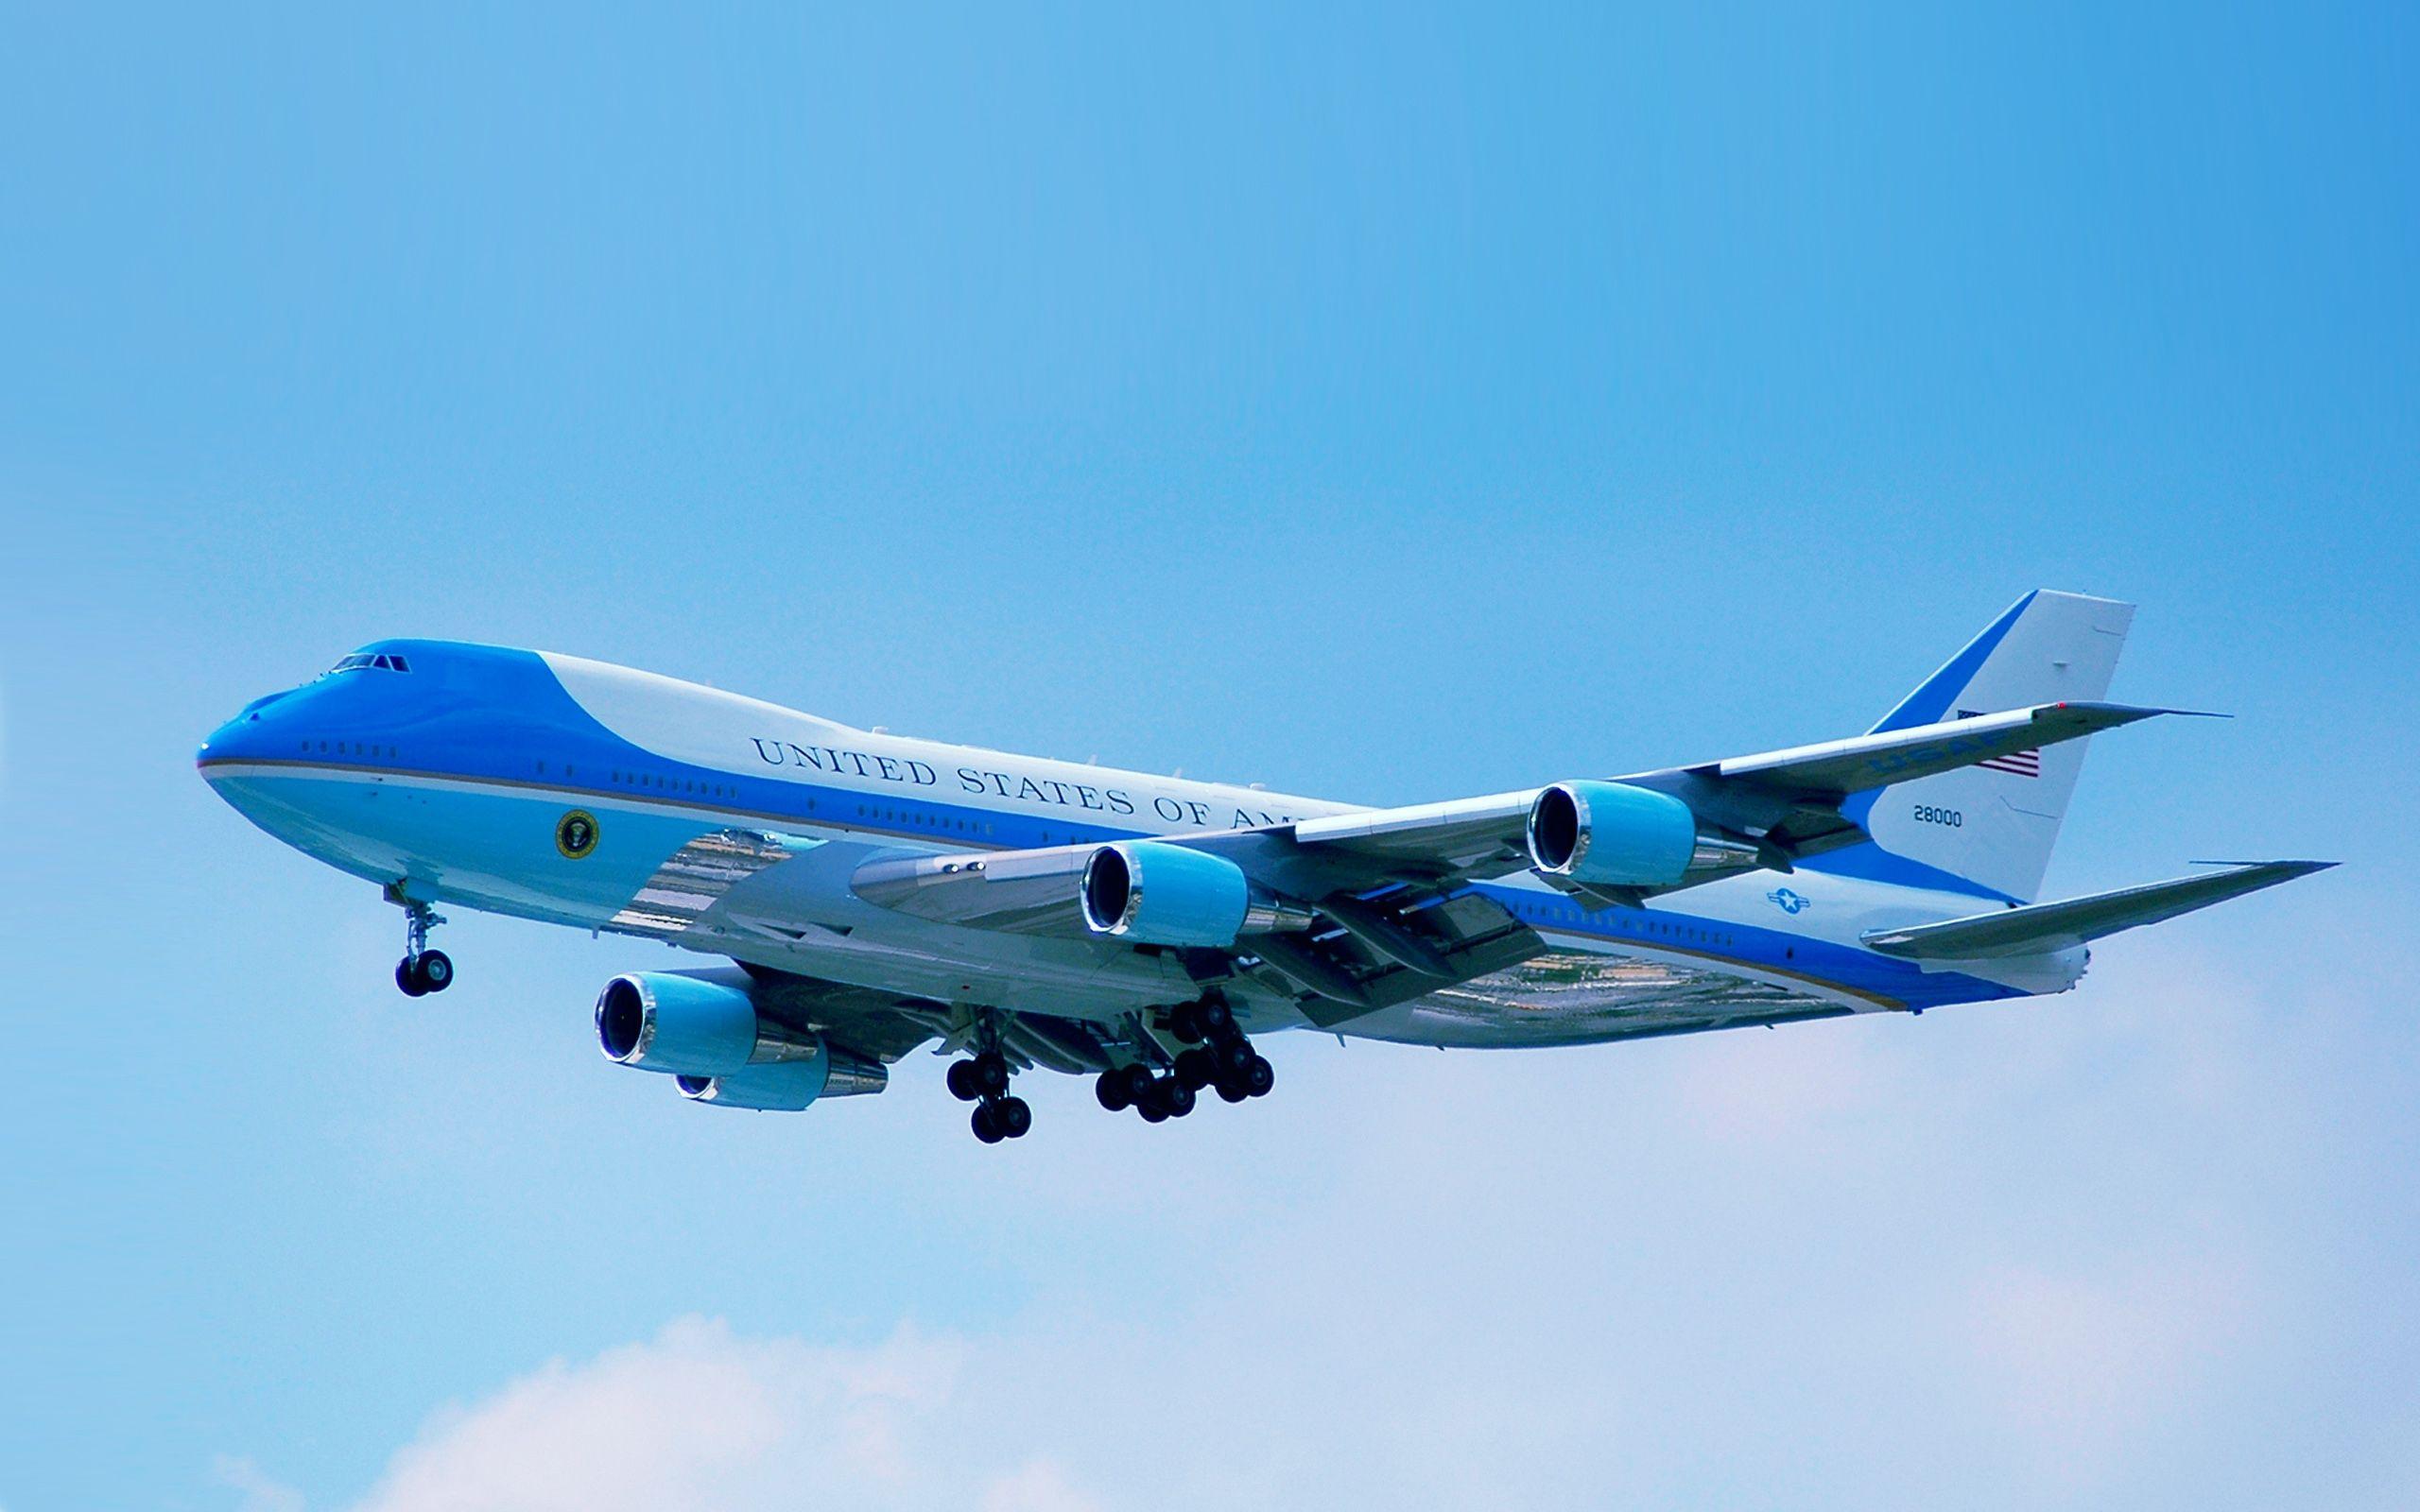 Air Force One Wallpaper Background 59525 2560x1600 px